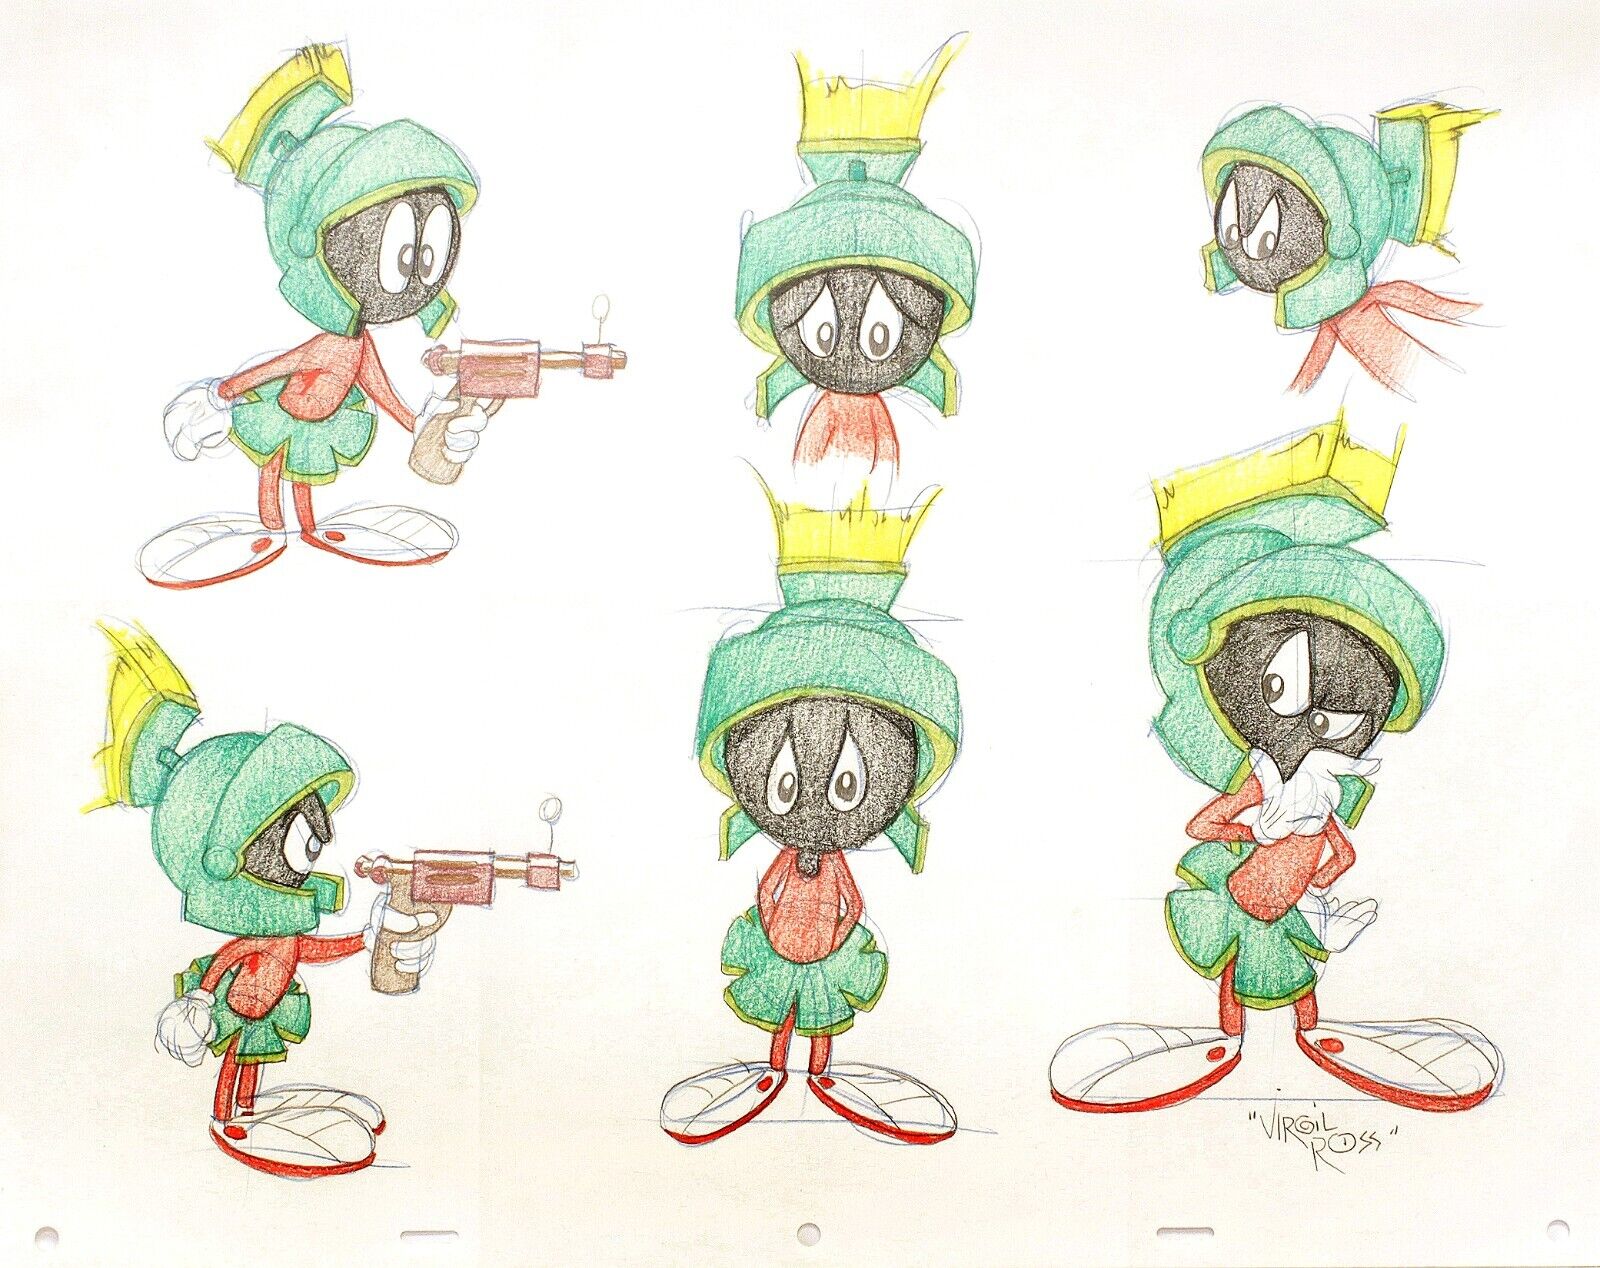 SIX ORIGINAL DRAWINGS OF - Marvin the Martian - Signed By Virgil Ross